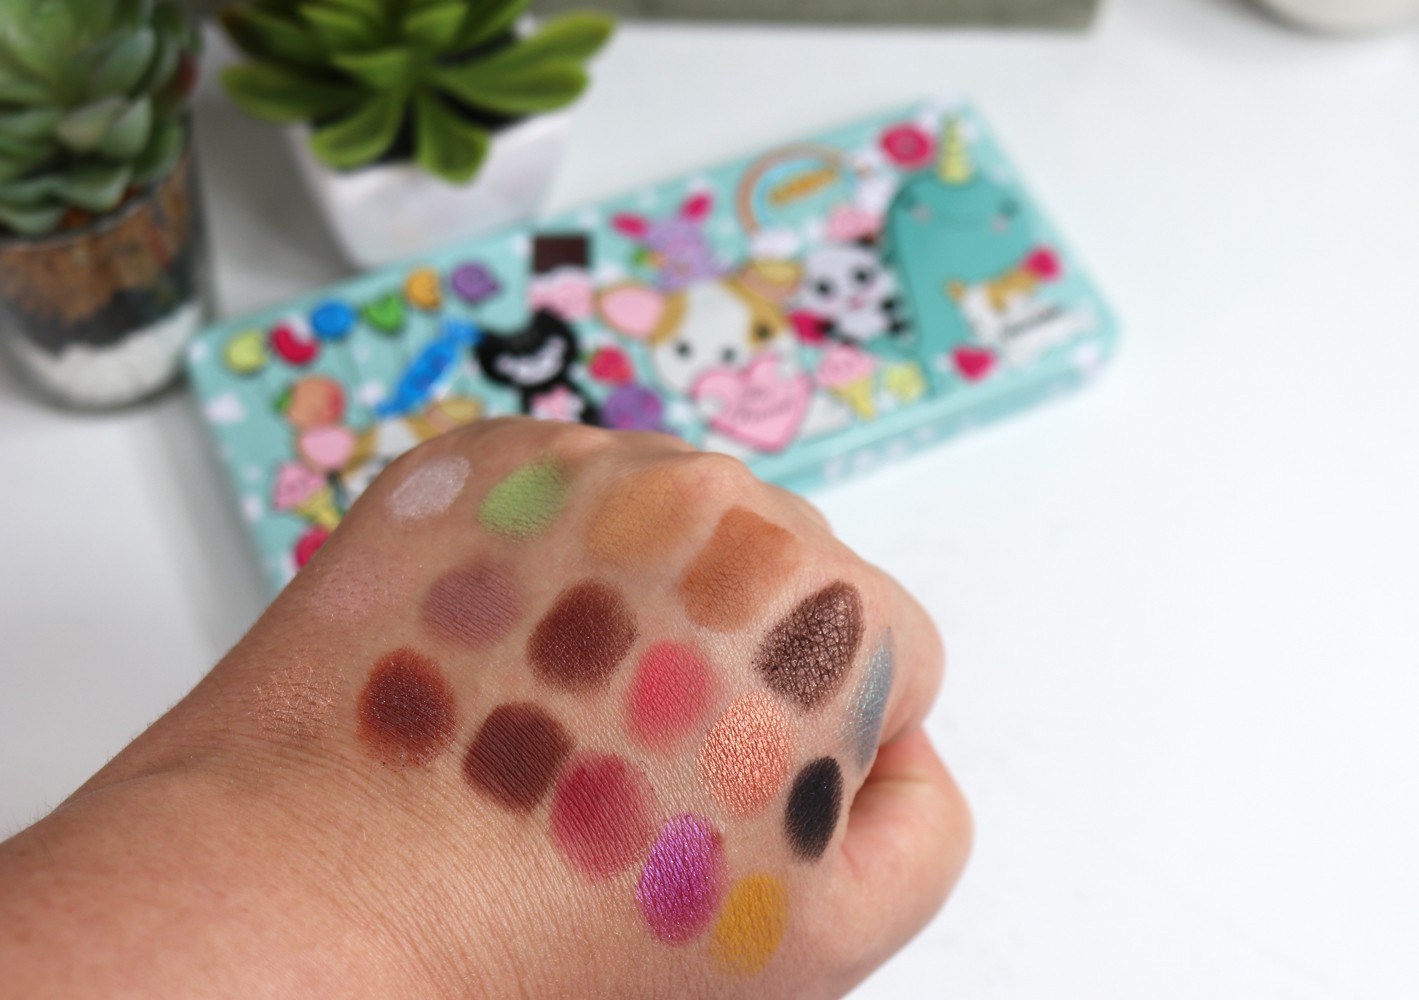 Too Faced Clover palette swatches and review